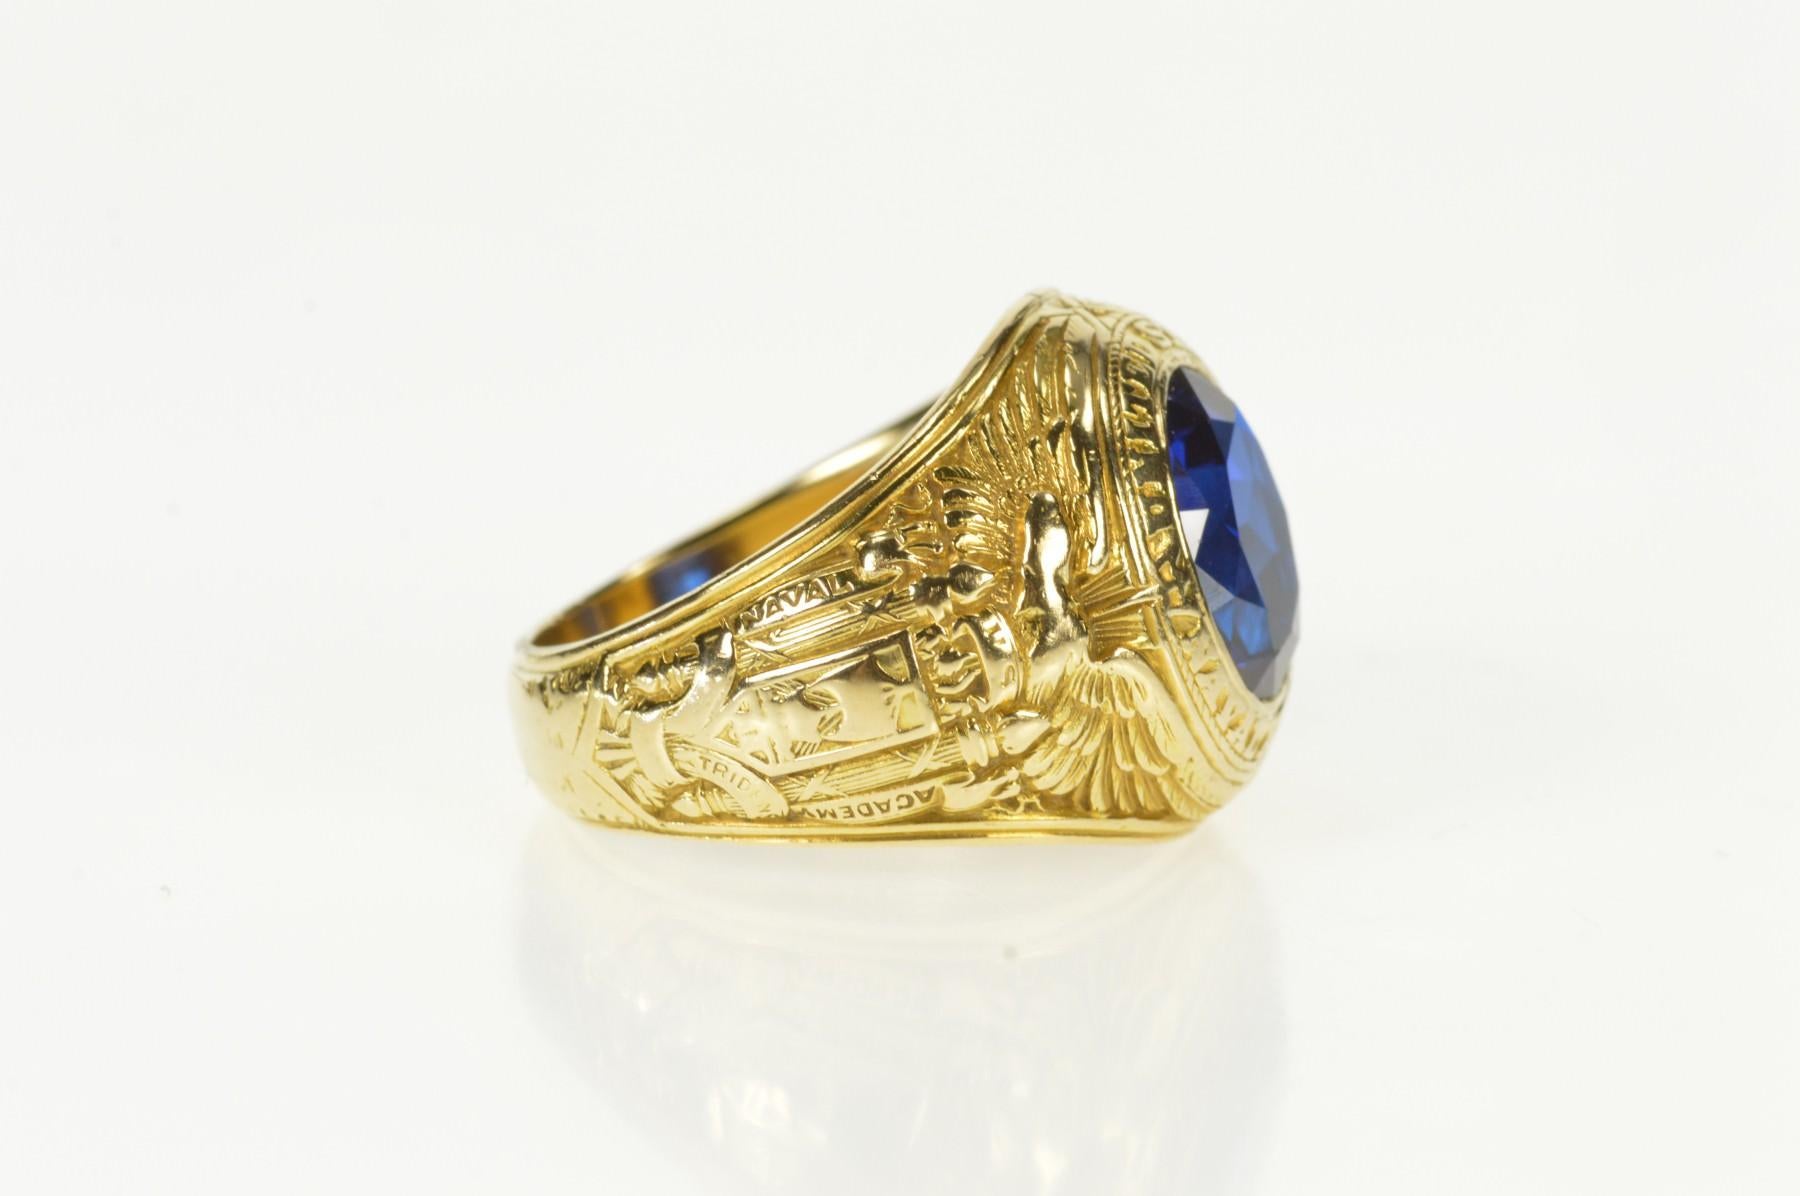 Historic 1927 Tiffany Naval Academy Class Ring. Size 9.75 weighing 24 grams crafted in 14k yellow gold. 
